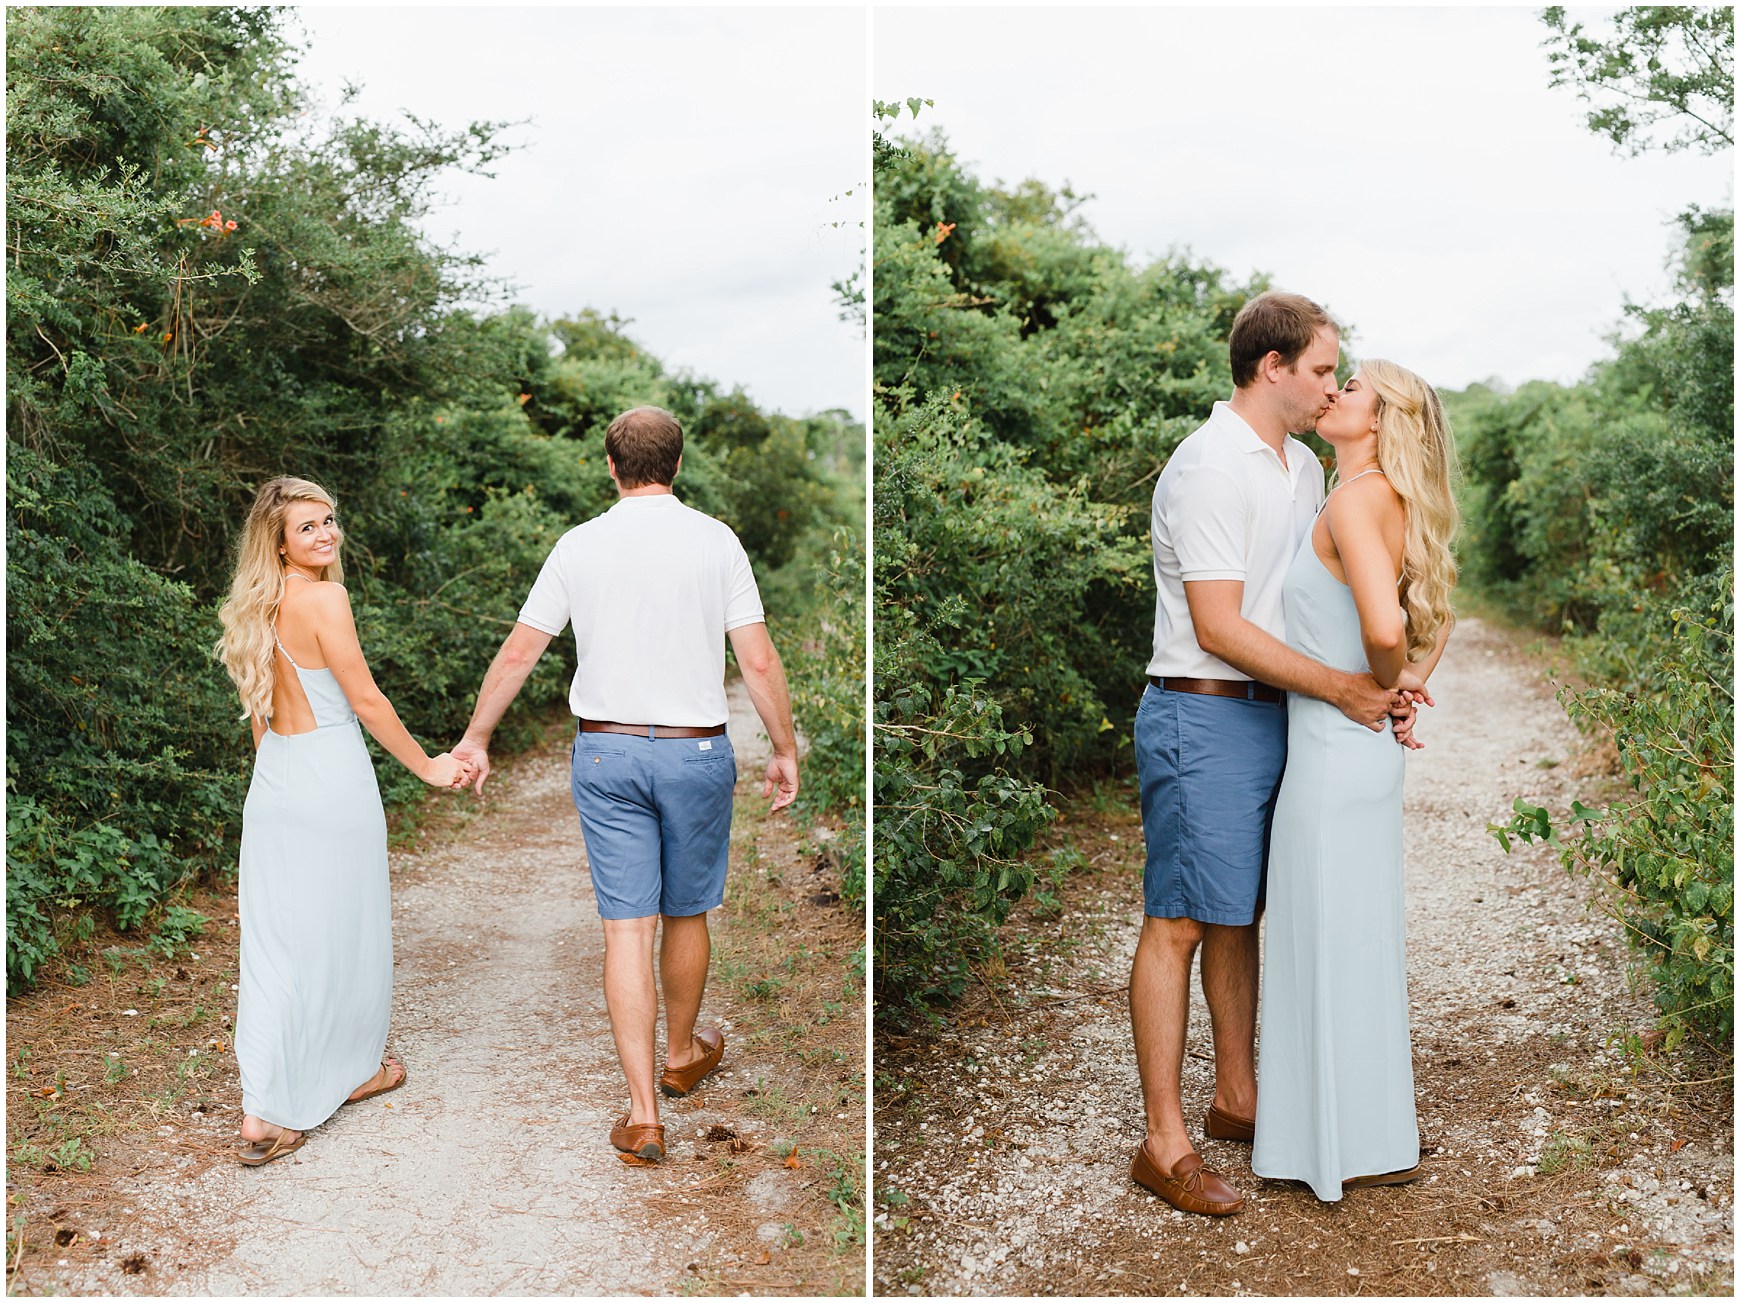 Engagement session at Fort Pickens on Pensacola Beach, FL